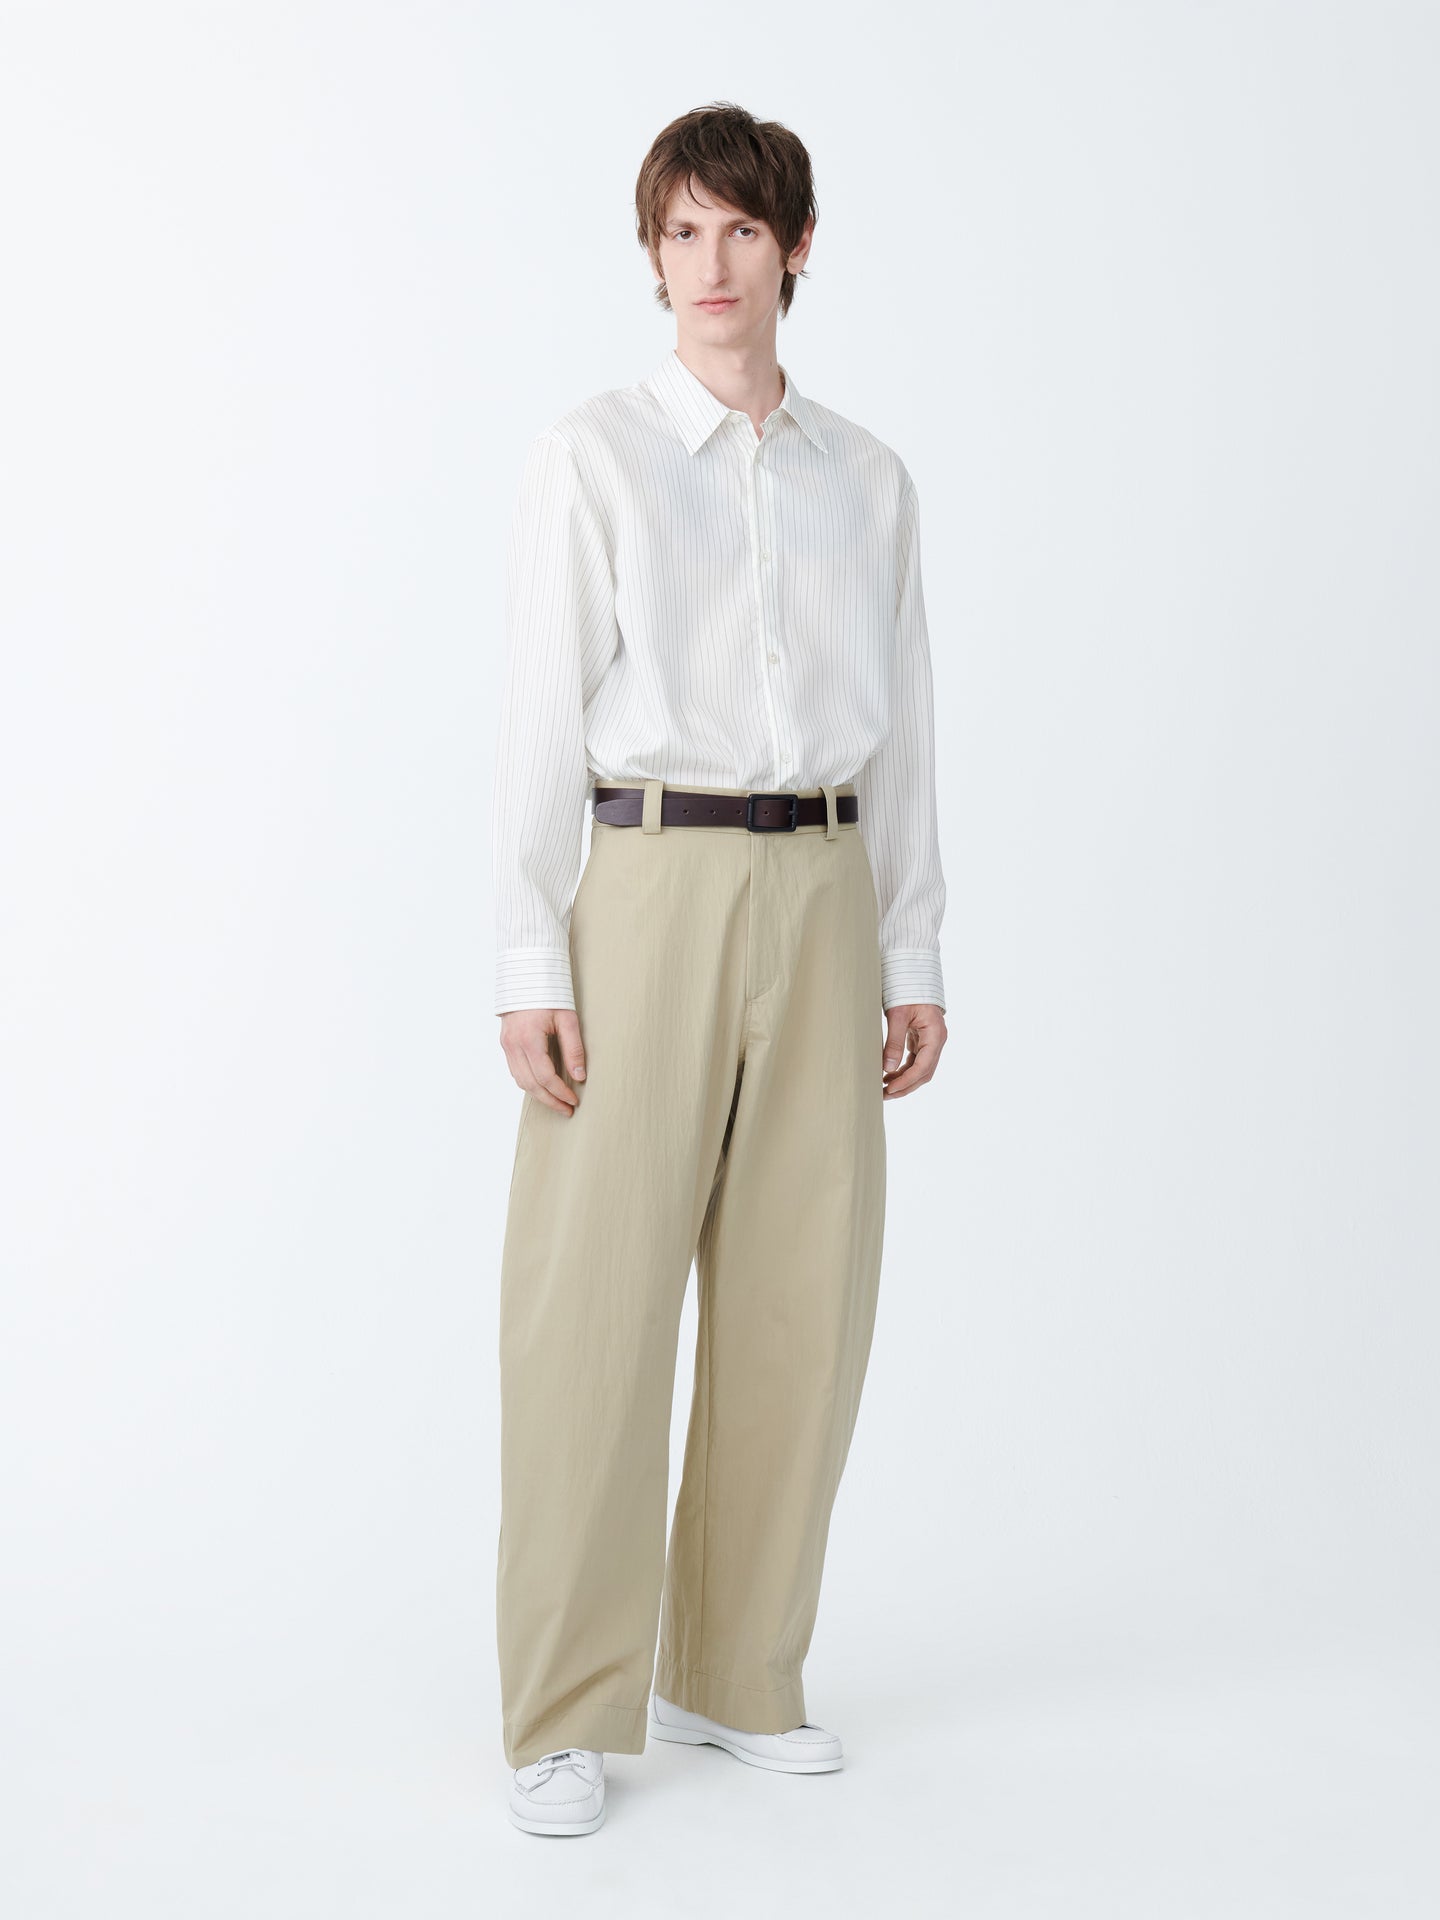 Levy Sporty Cotton Pant in Sand